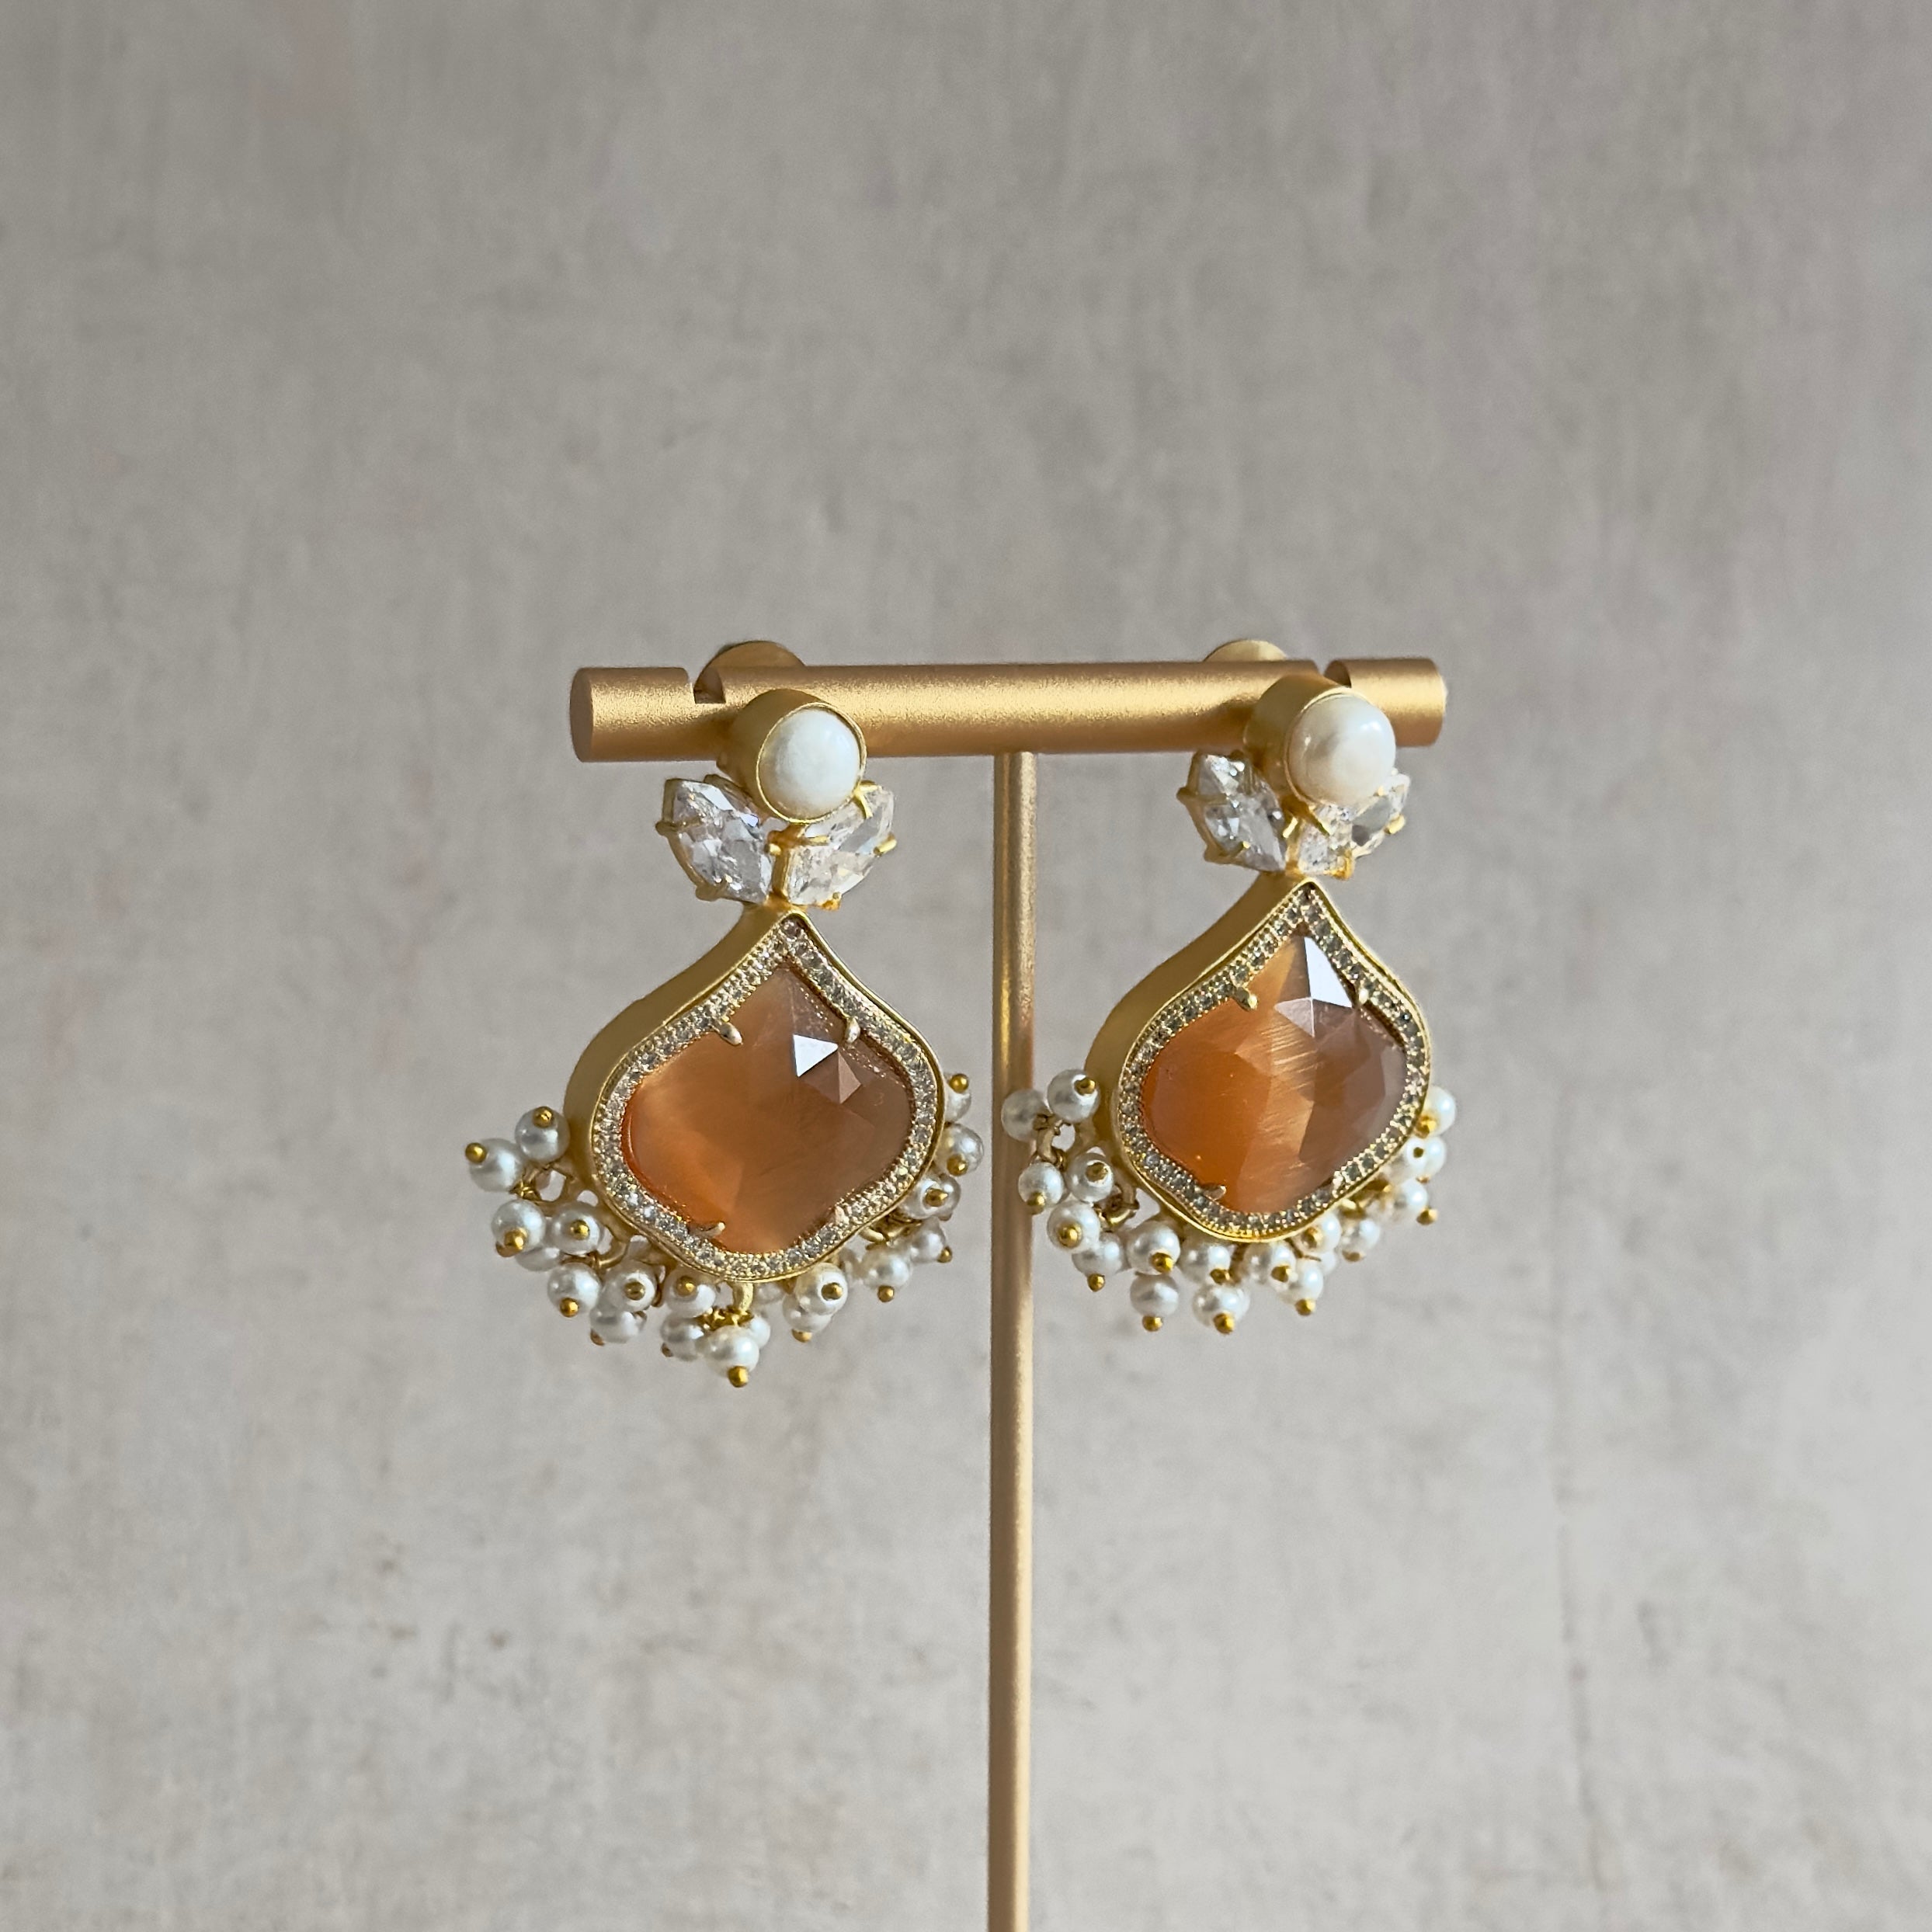 Introducing our Gaia Brown Pearl Earrings, a luscious new design featuring freshwater pearls and dazzling cz crystals. The beautiful brown honey stone adds a touch of natural elegance to these luxurious and exclusive earrings. Elevate your style today with these exquisite earrings.